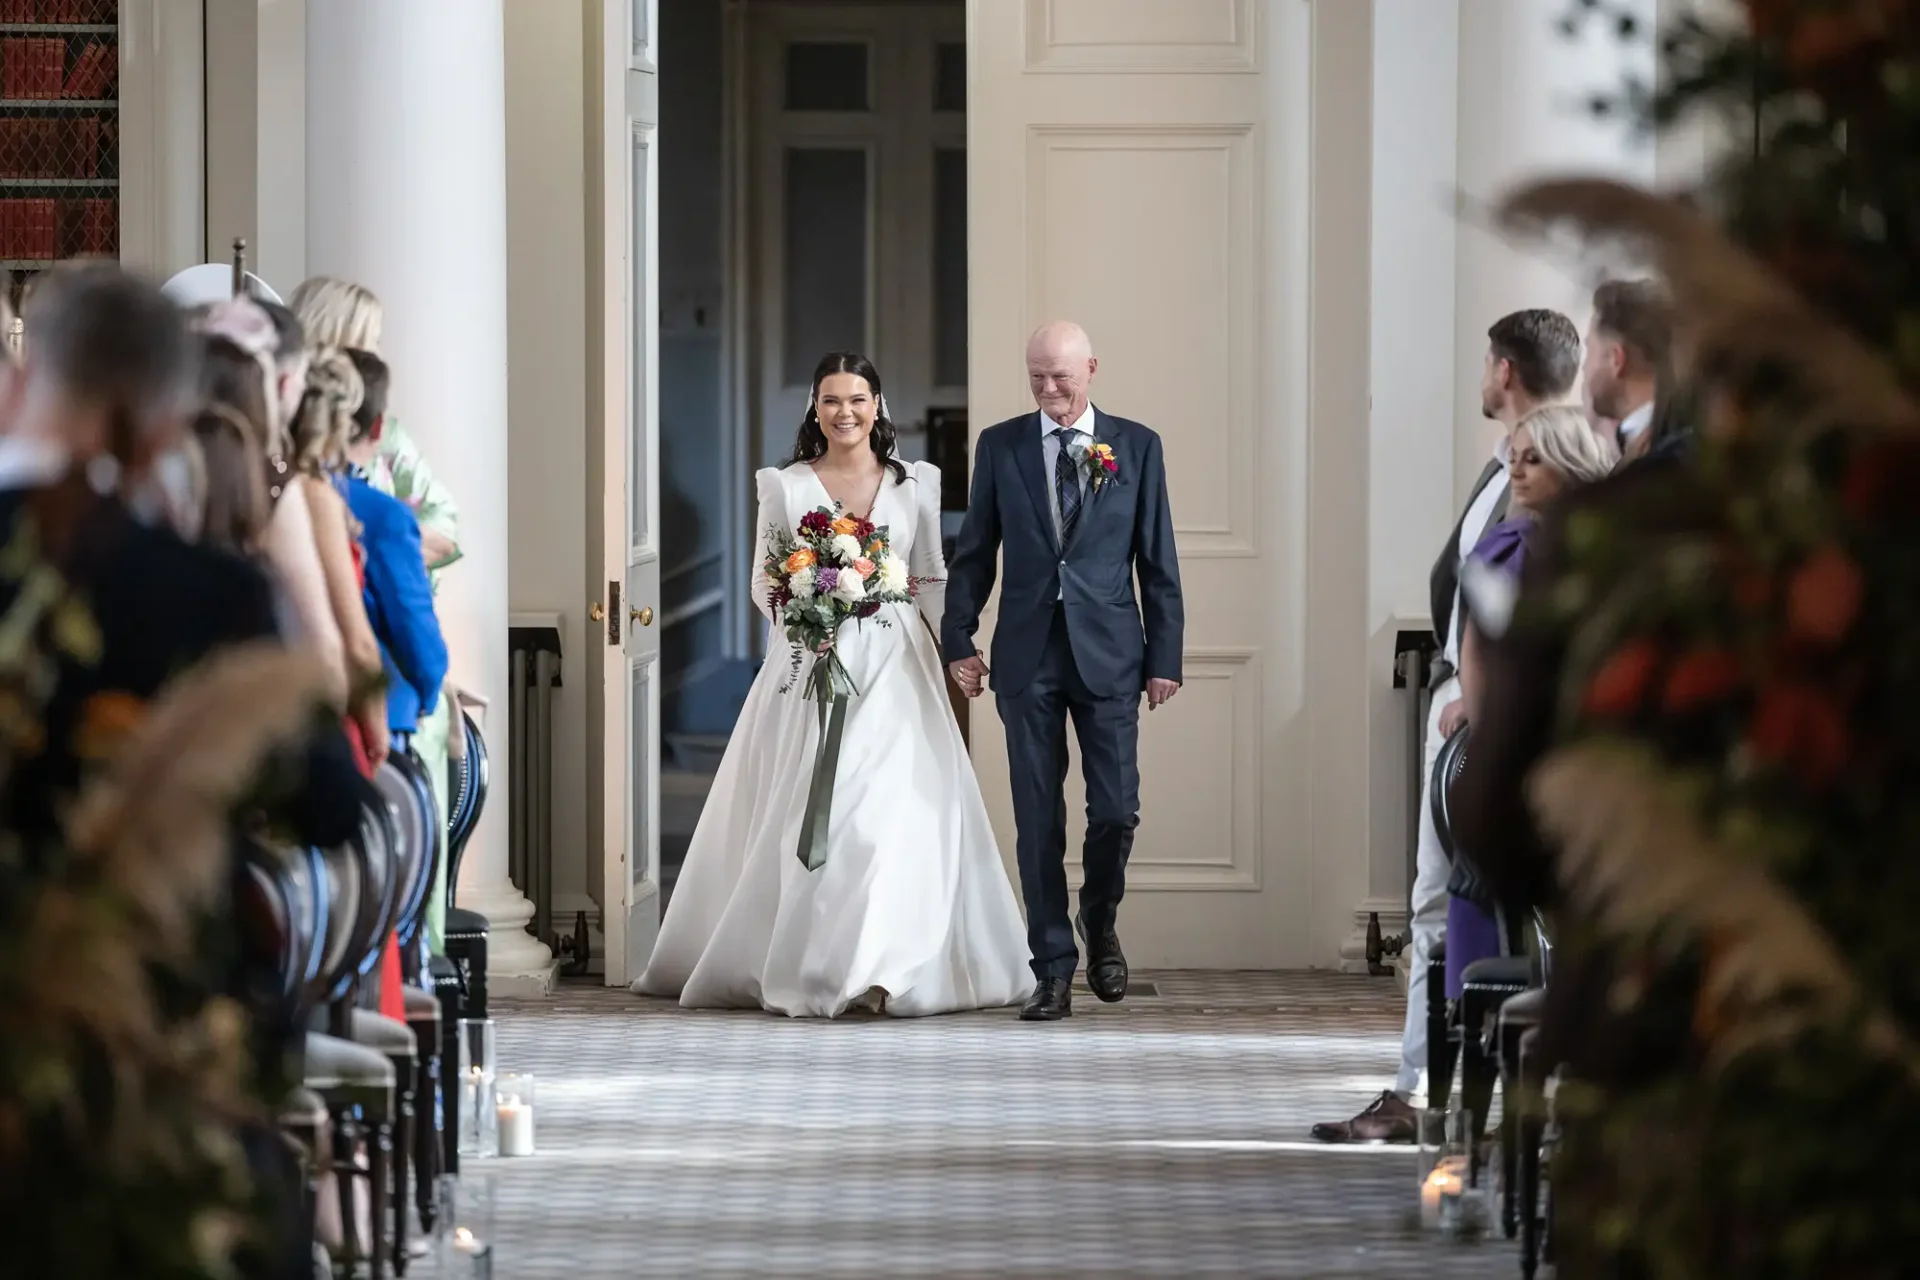 A bride and her father walk down the aisle, smiling, with seated guests on either side in a well-lit, elegant hallway.